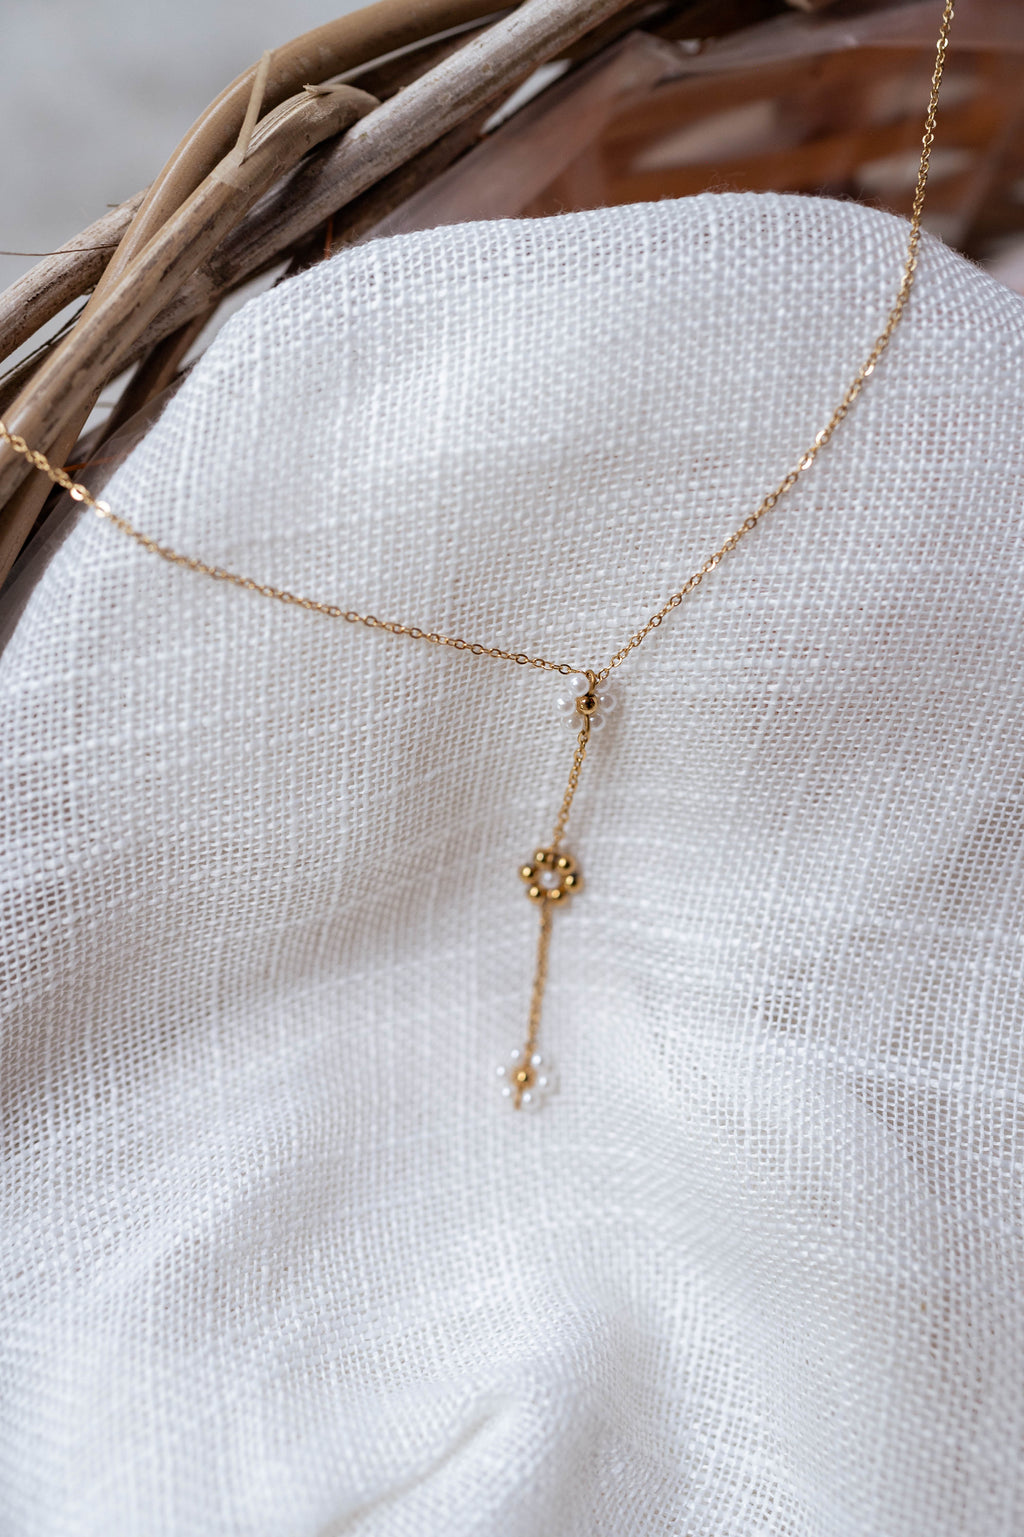 Flavy necklace - Golden